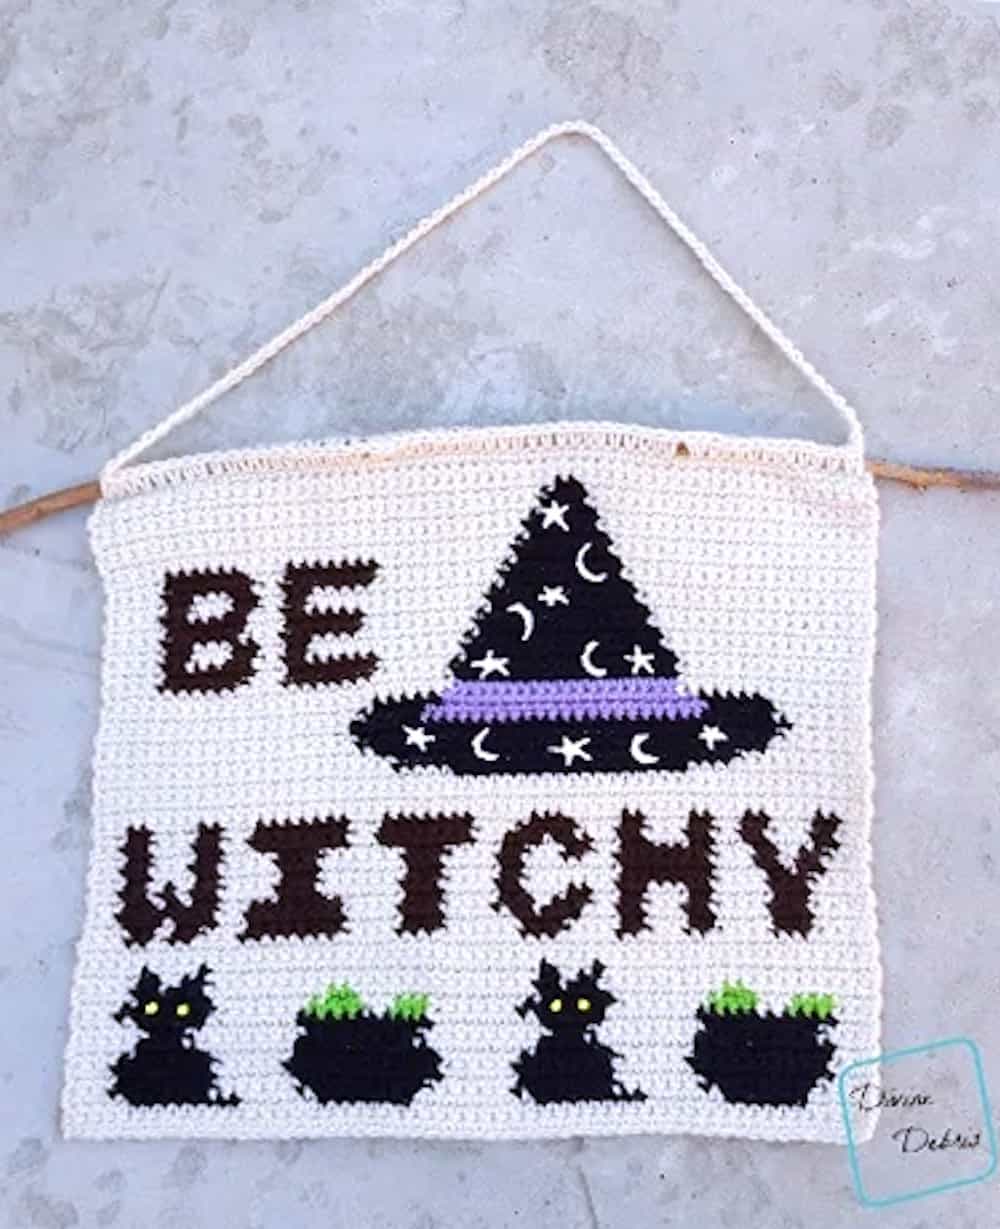 Crocheted wall hanging with the text Be Witchy on it.